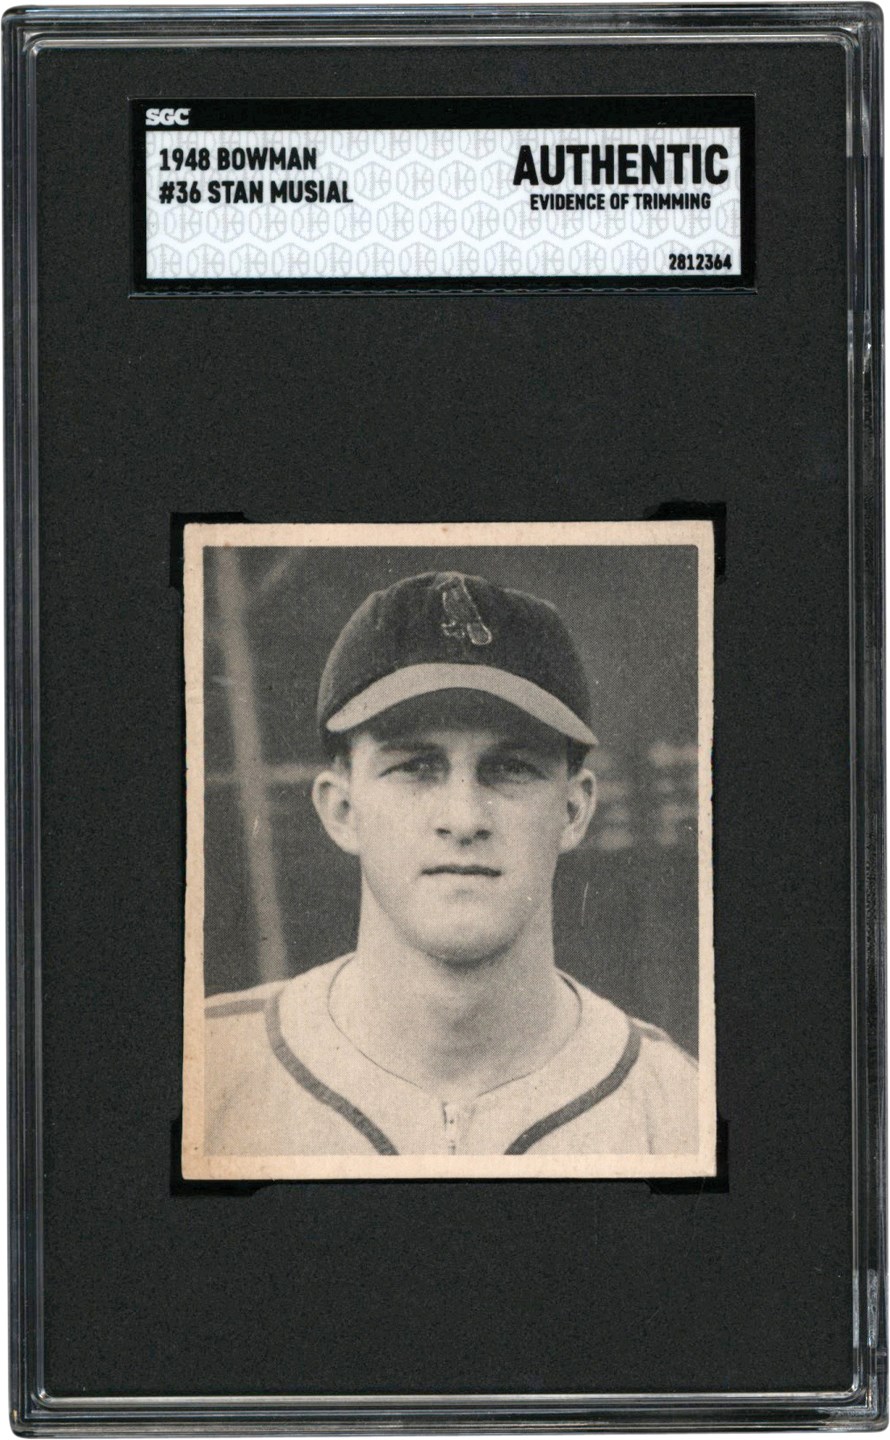 Baseball and Trading Cards - 1948 Bowman #36 Stan Musial Rookie Card SGC Authentic